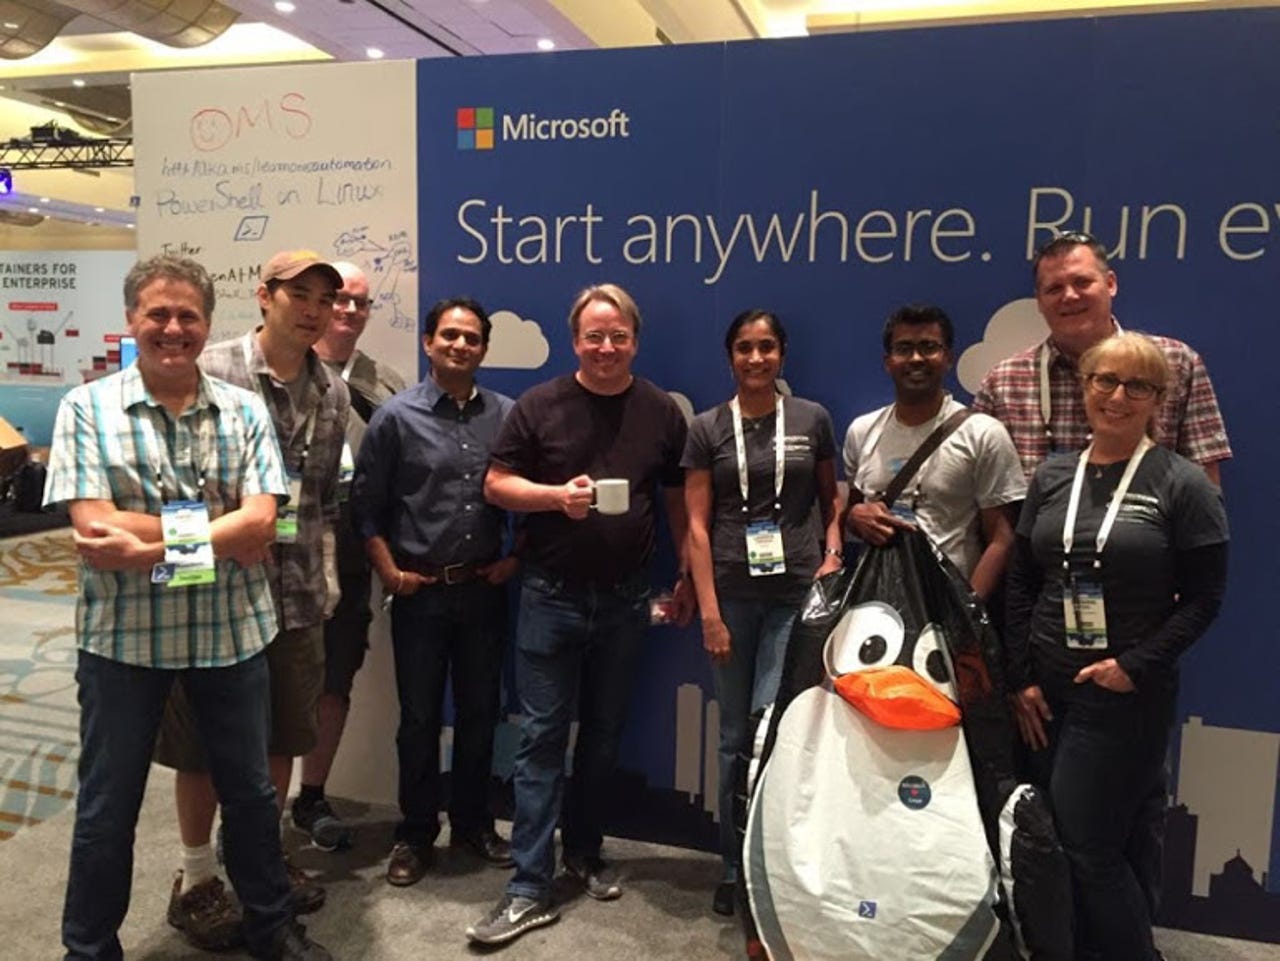 Linus Torvalds visiting Microsoft Booth